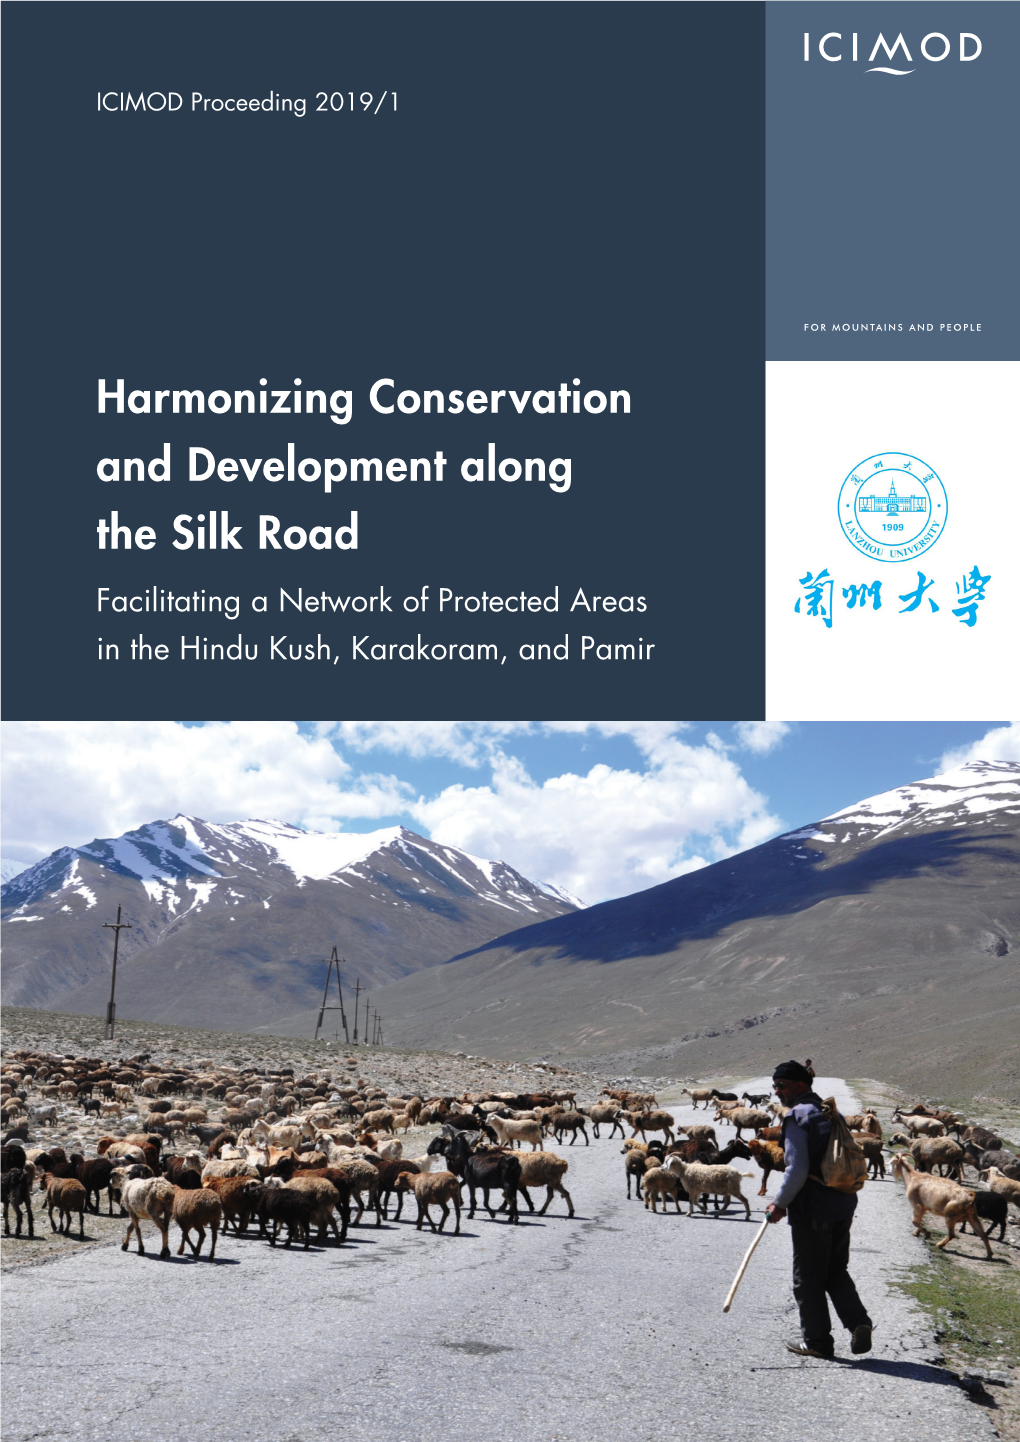 Harmonizing Conservation and Development Along the Silk Road Facilitating a Network of Protected Areas in the Hindu Kush, Karakoram, and Pamir